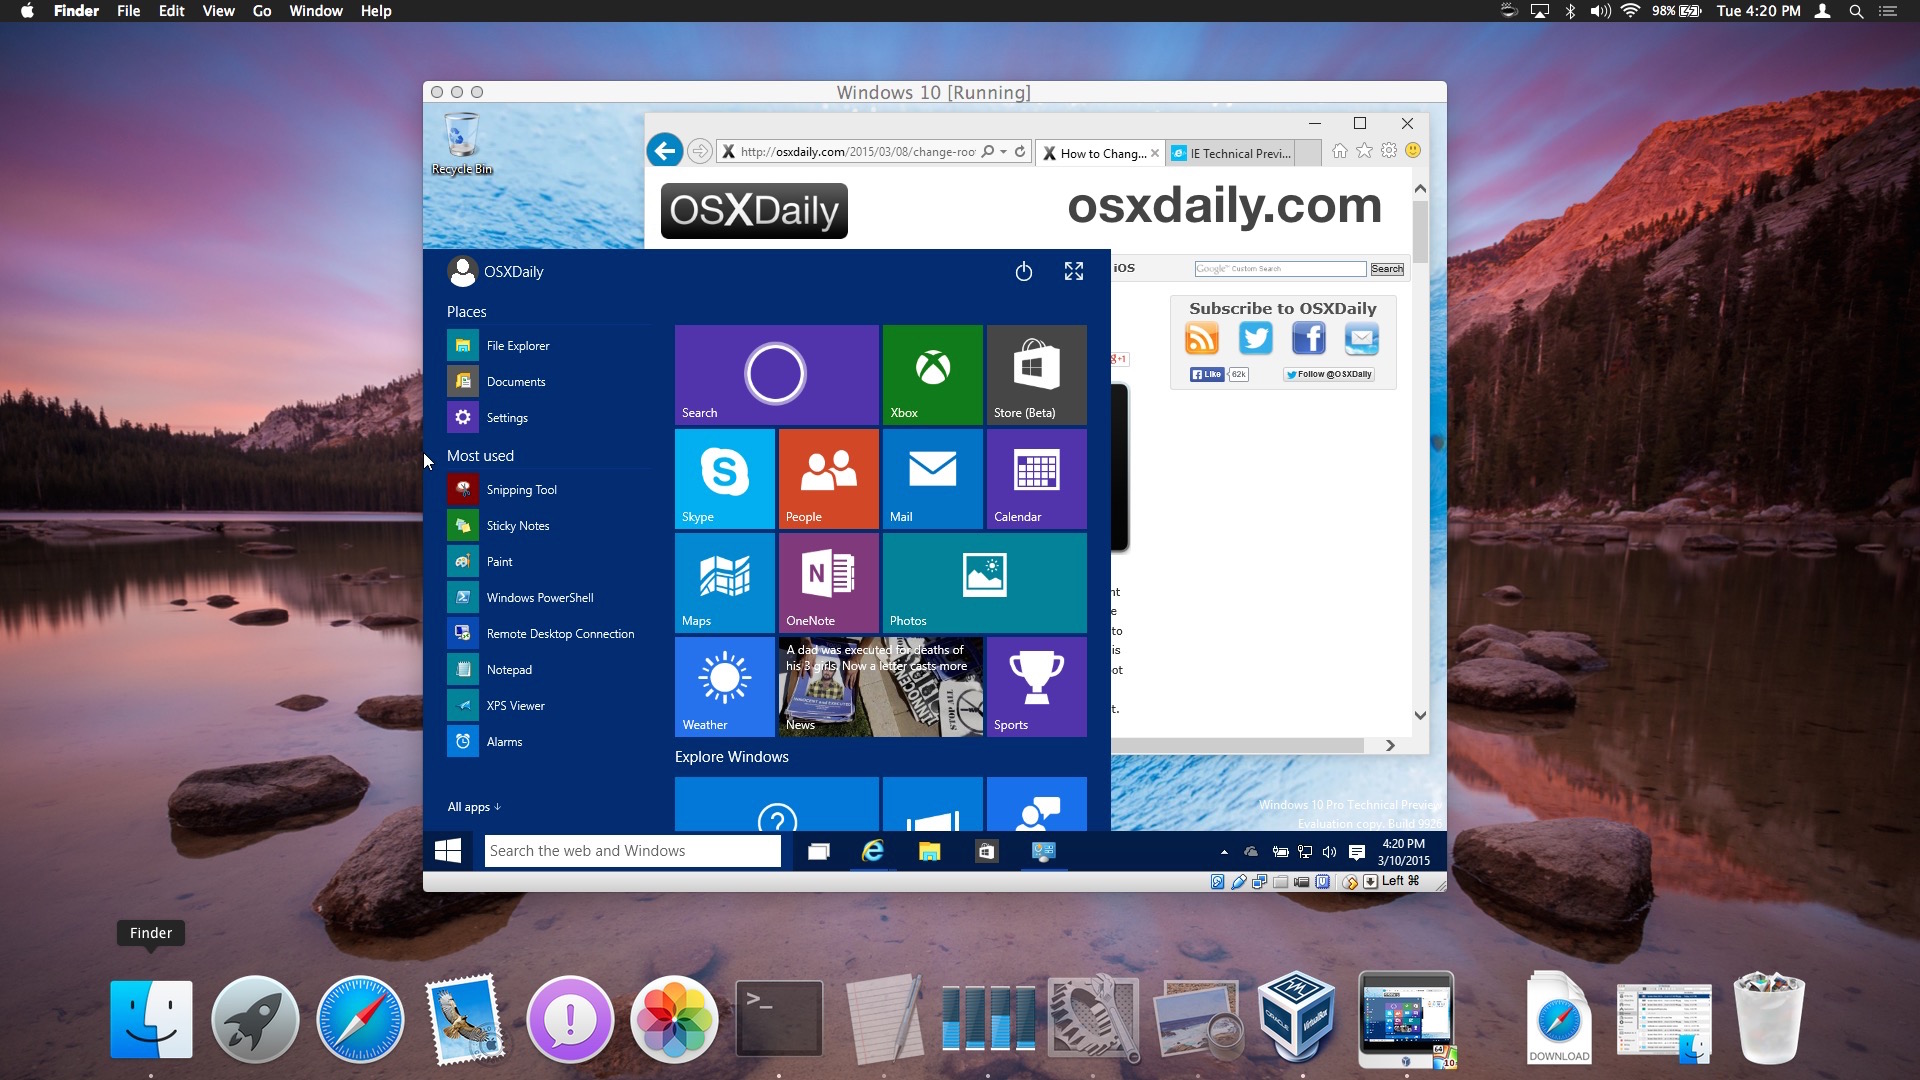 install activated version of windows 10 on mac for free